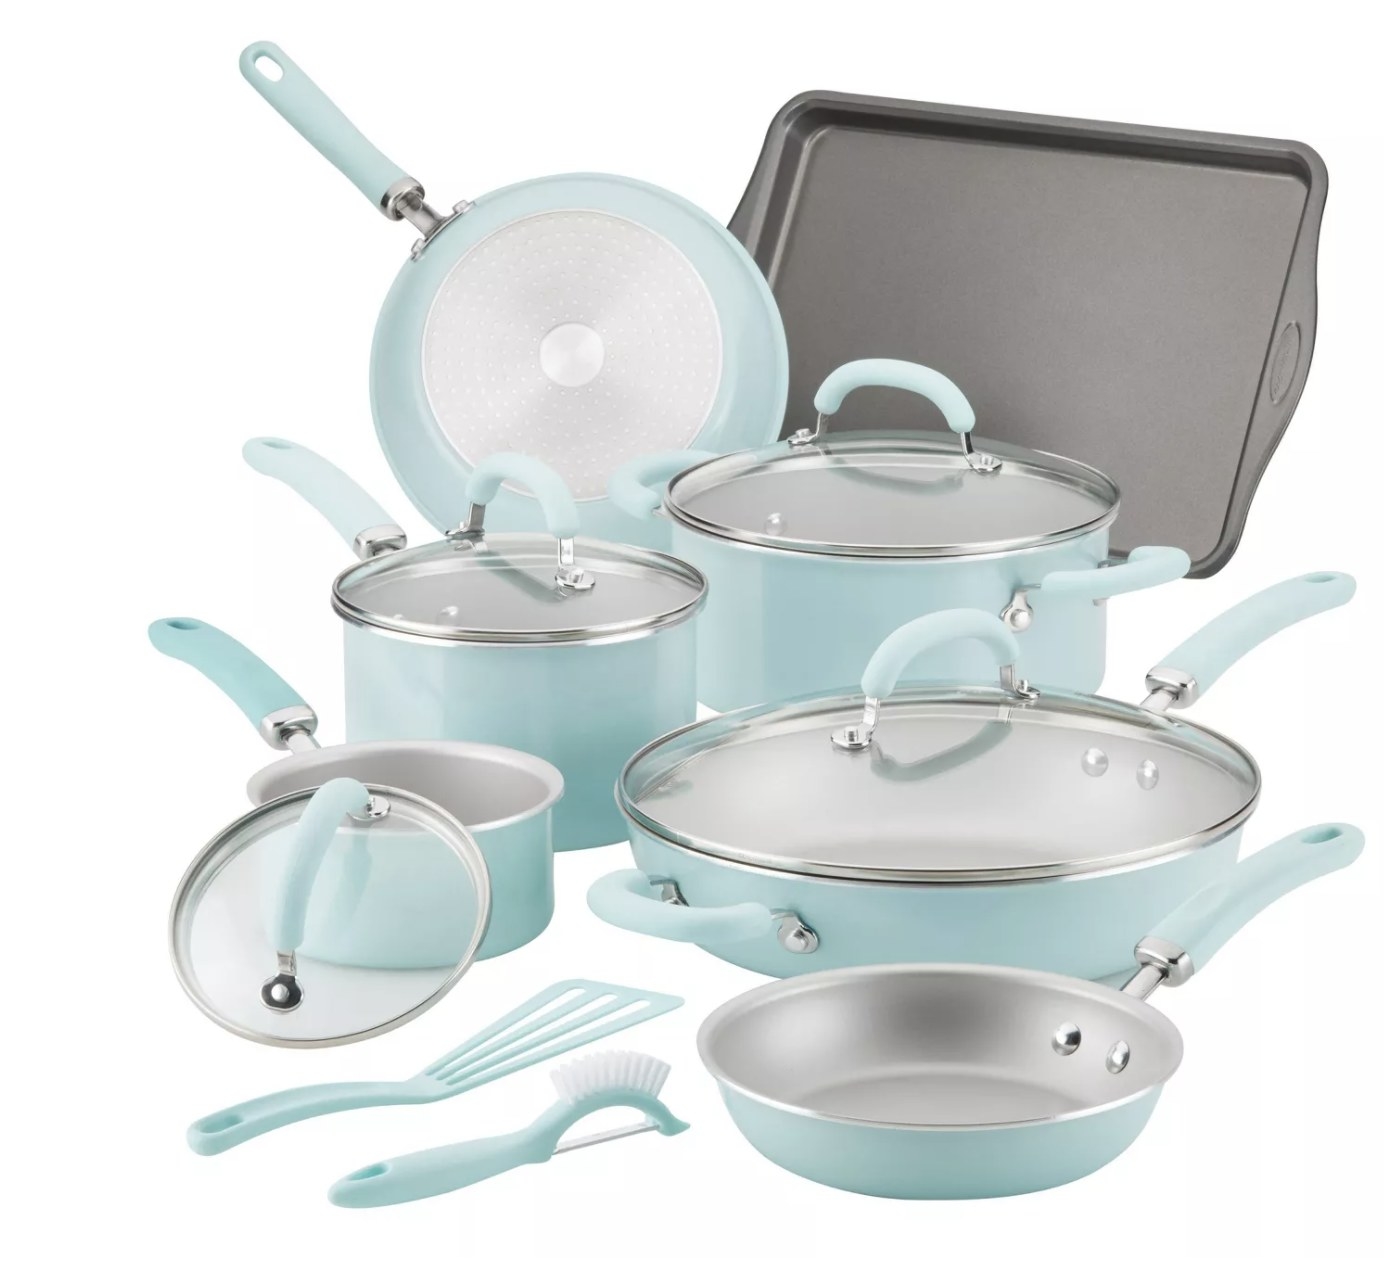 Cookware set in the color teal